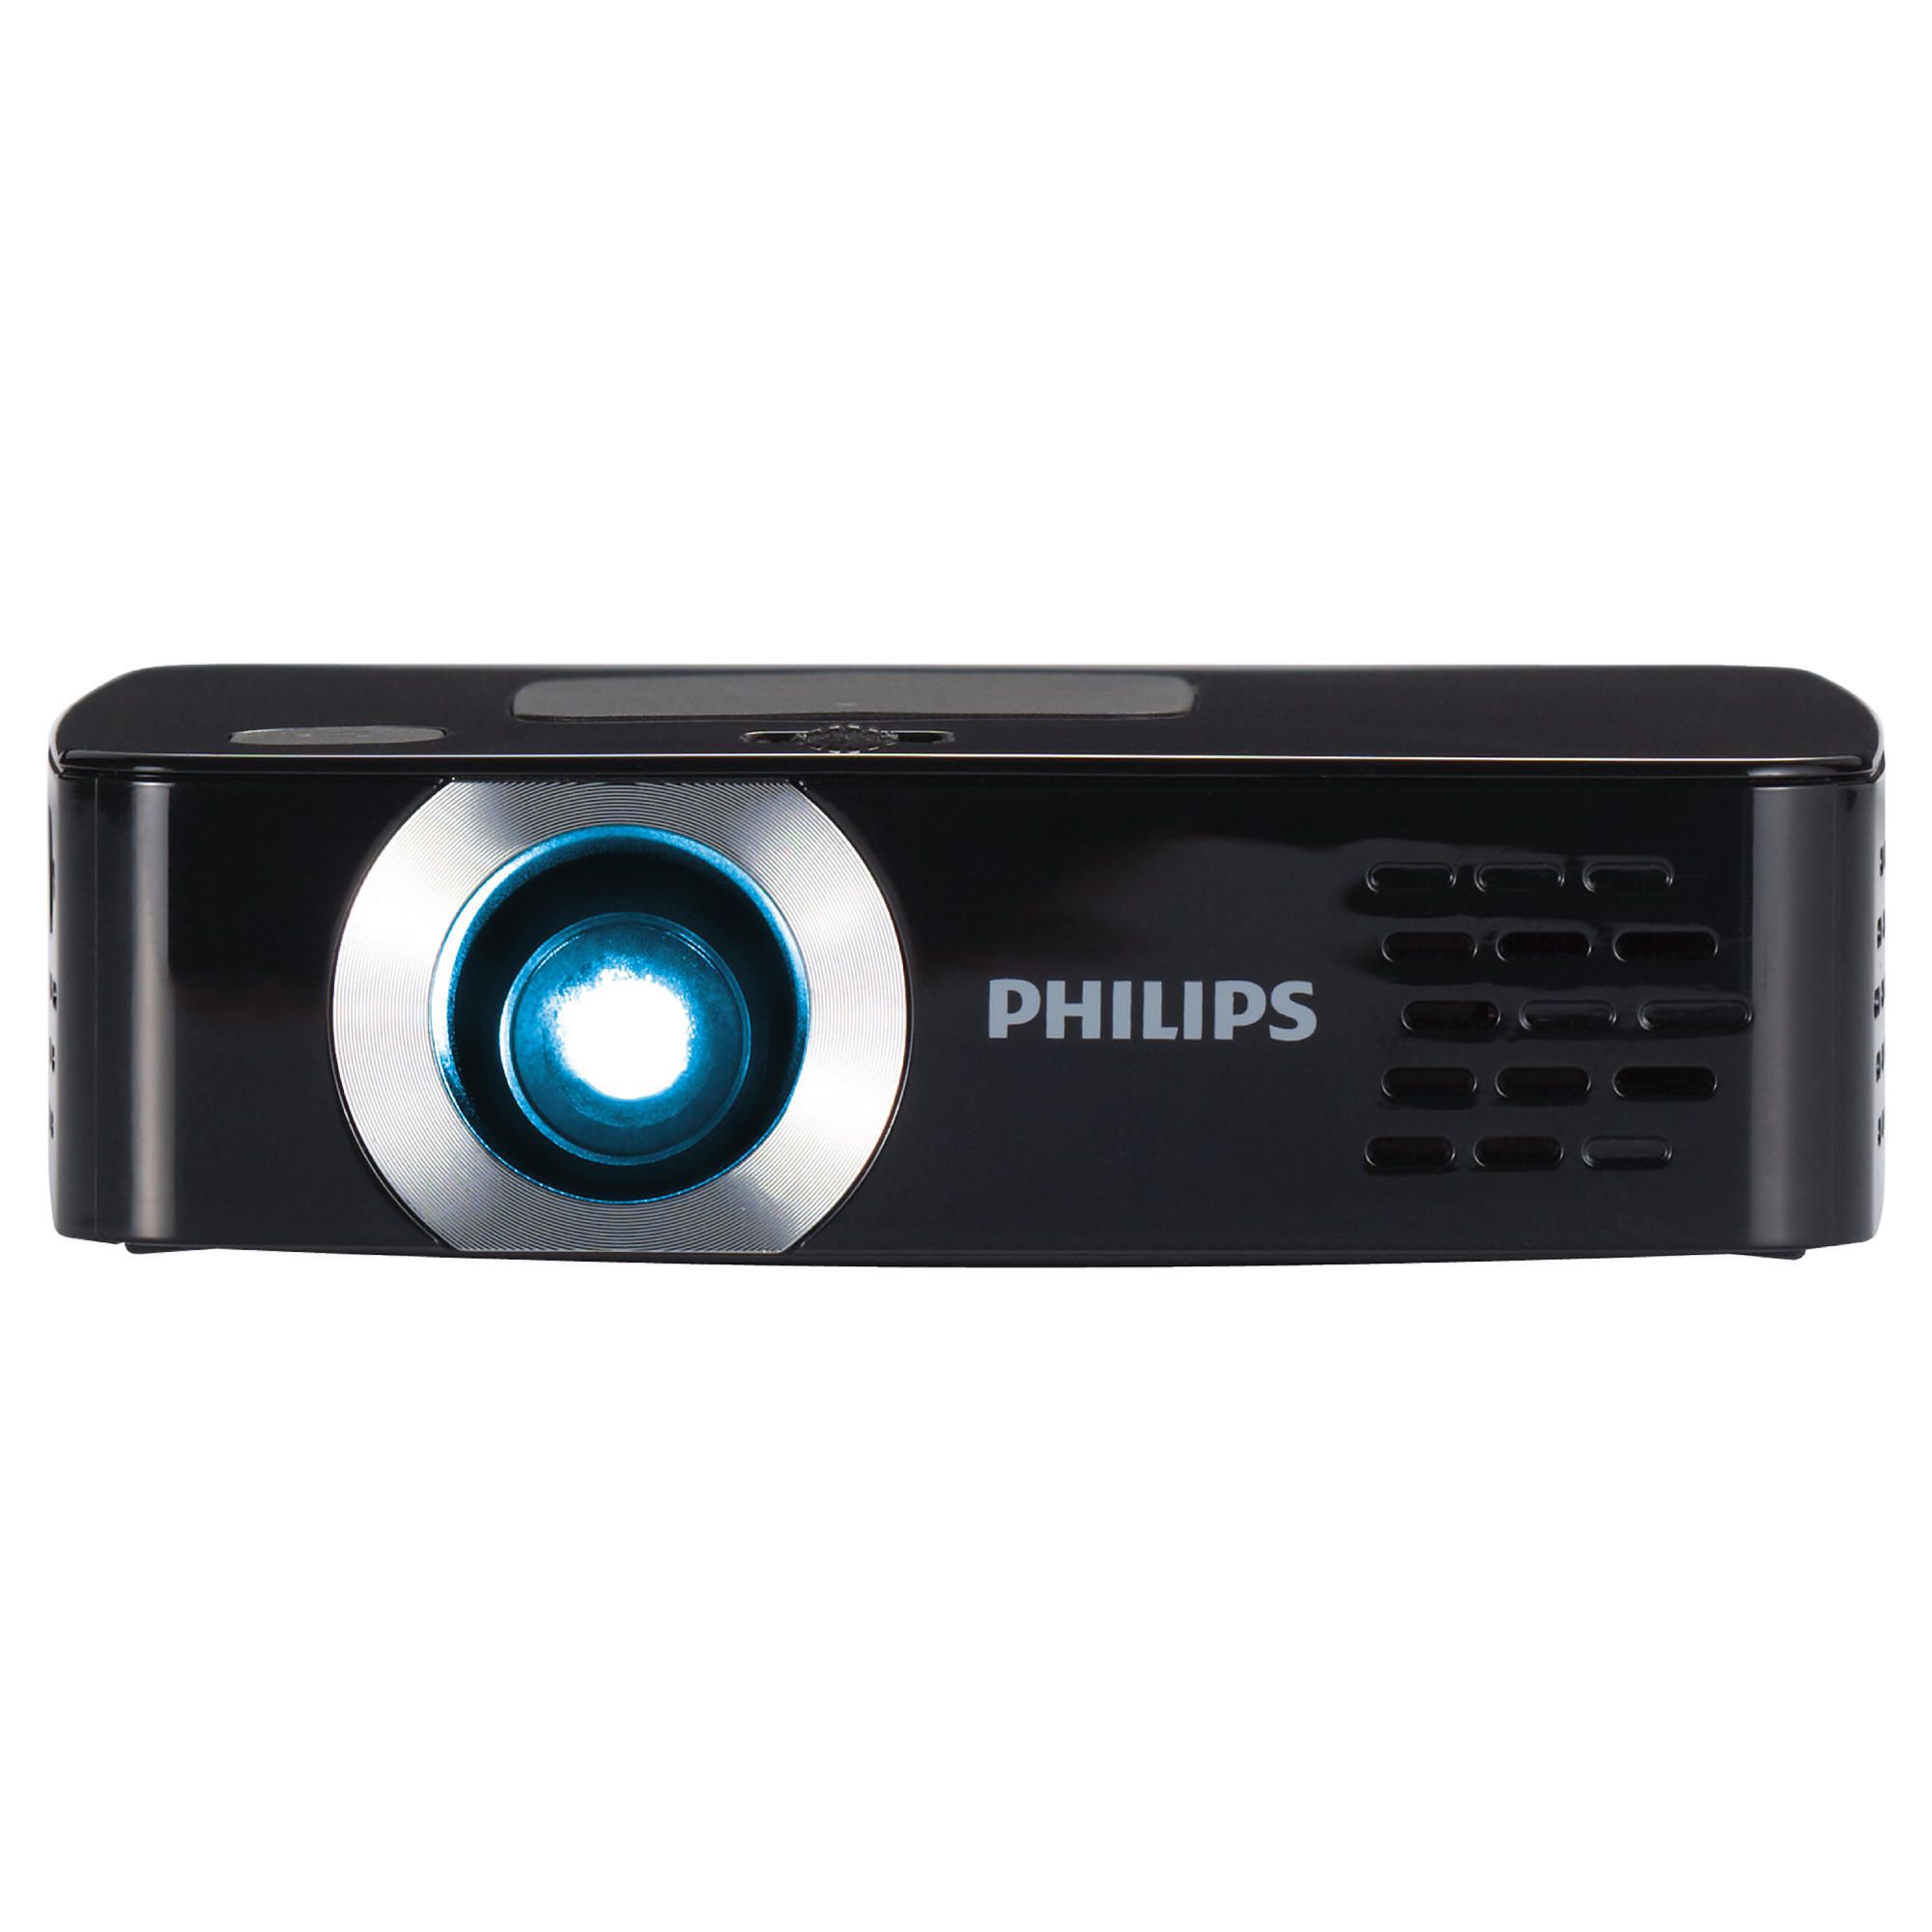 Philips PPX2480 Projector, Black at Tesco Direct